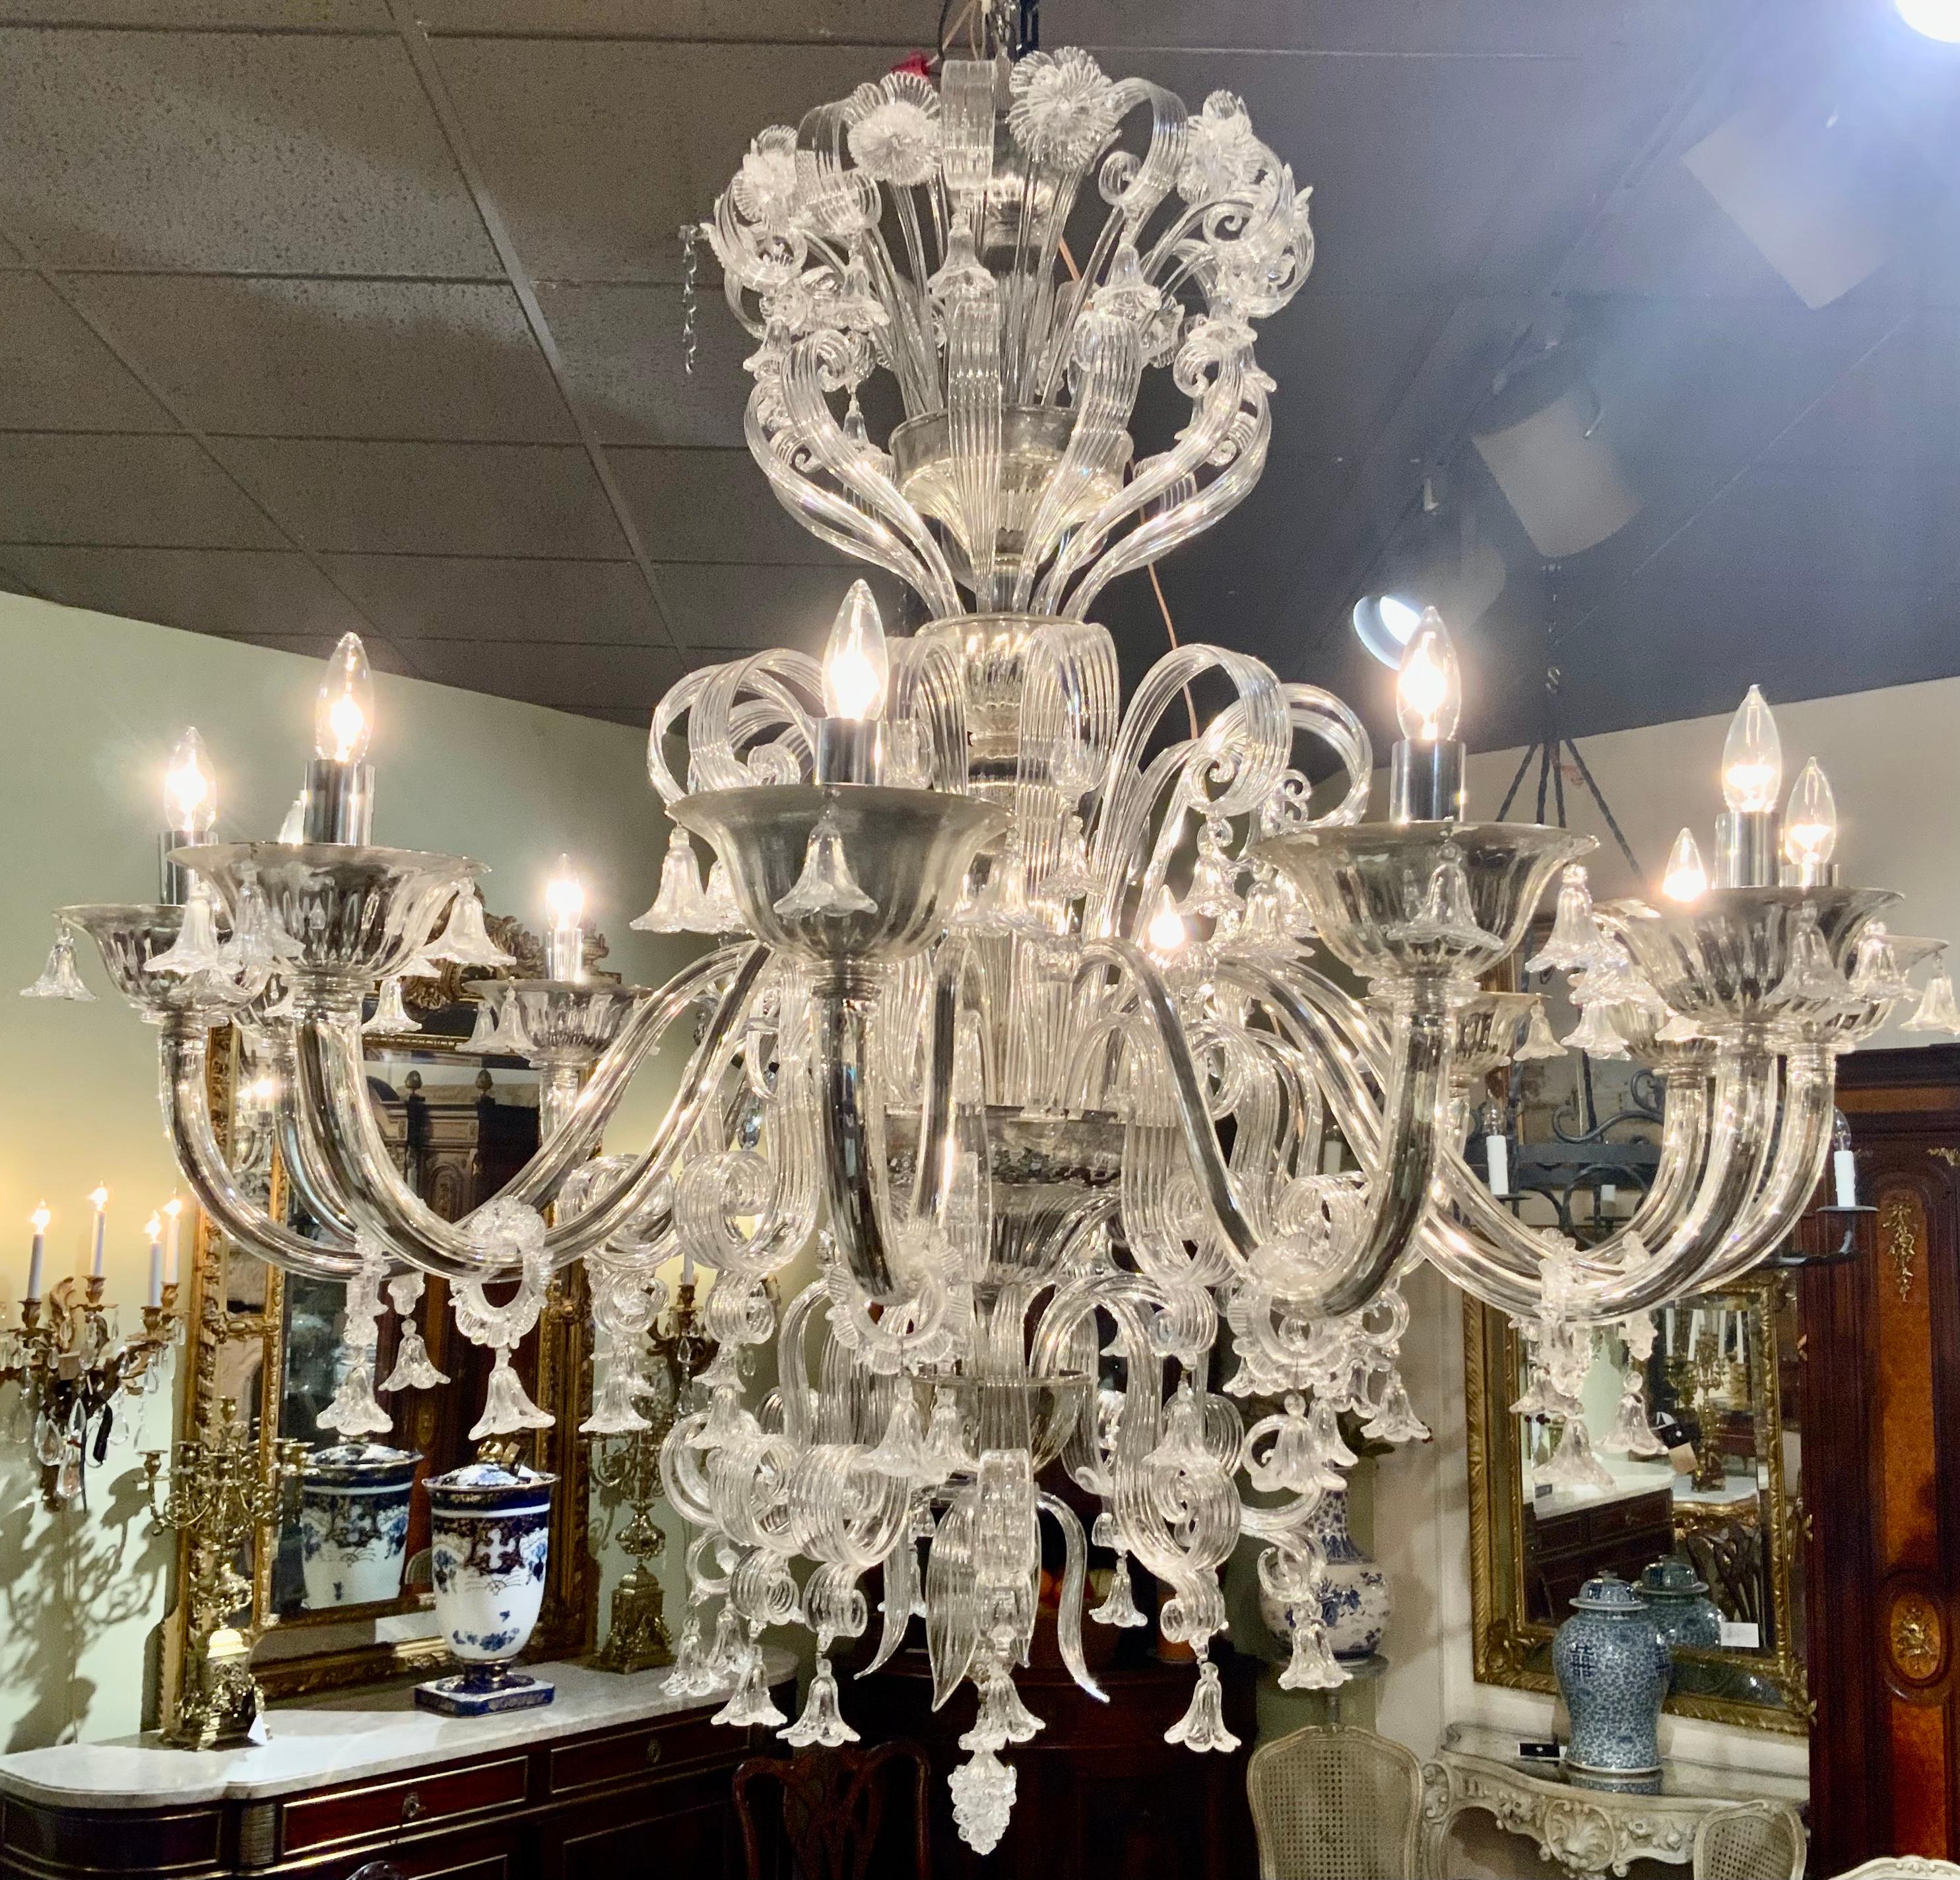 This large and dramatic chandelier has 12 scrolling glass-clad chrome arms.
With mirrored metal candle cups and a multitude of reeded scrolls, flowers.
and rings suspended with small blossoms all terminating in a delicate
floral pendant, the